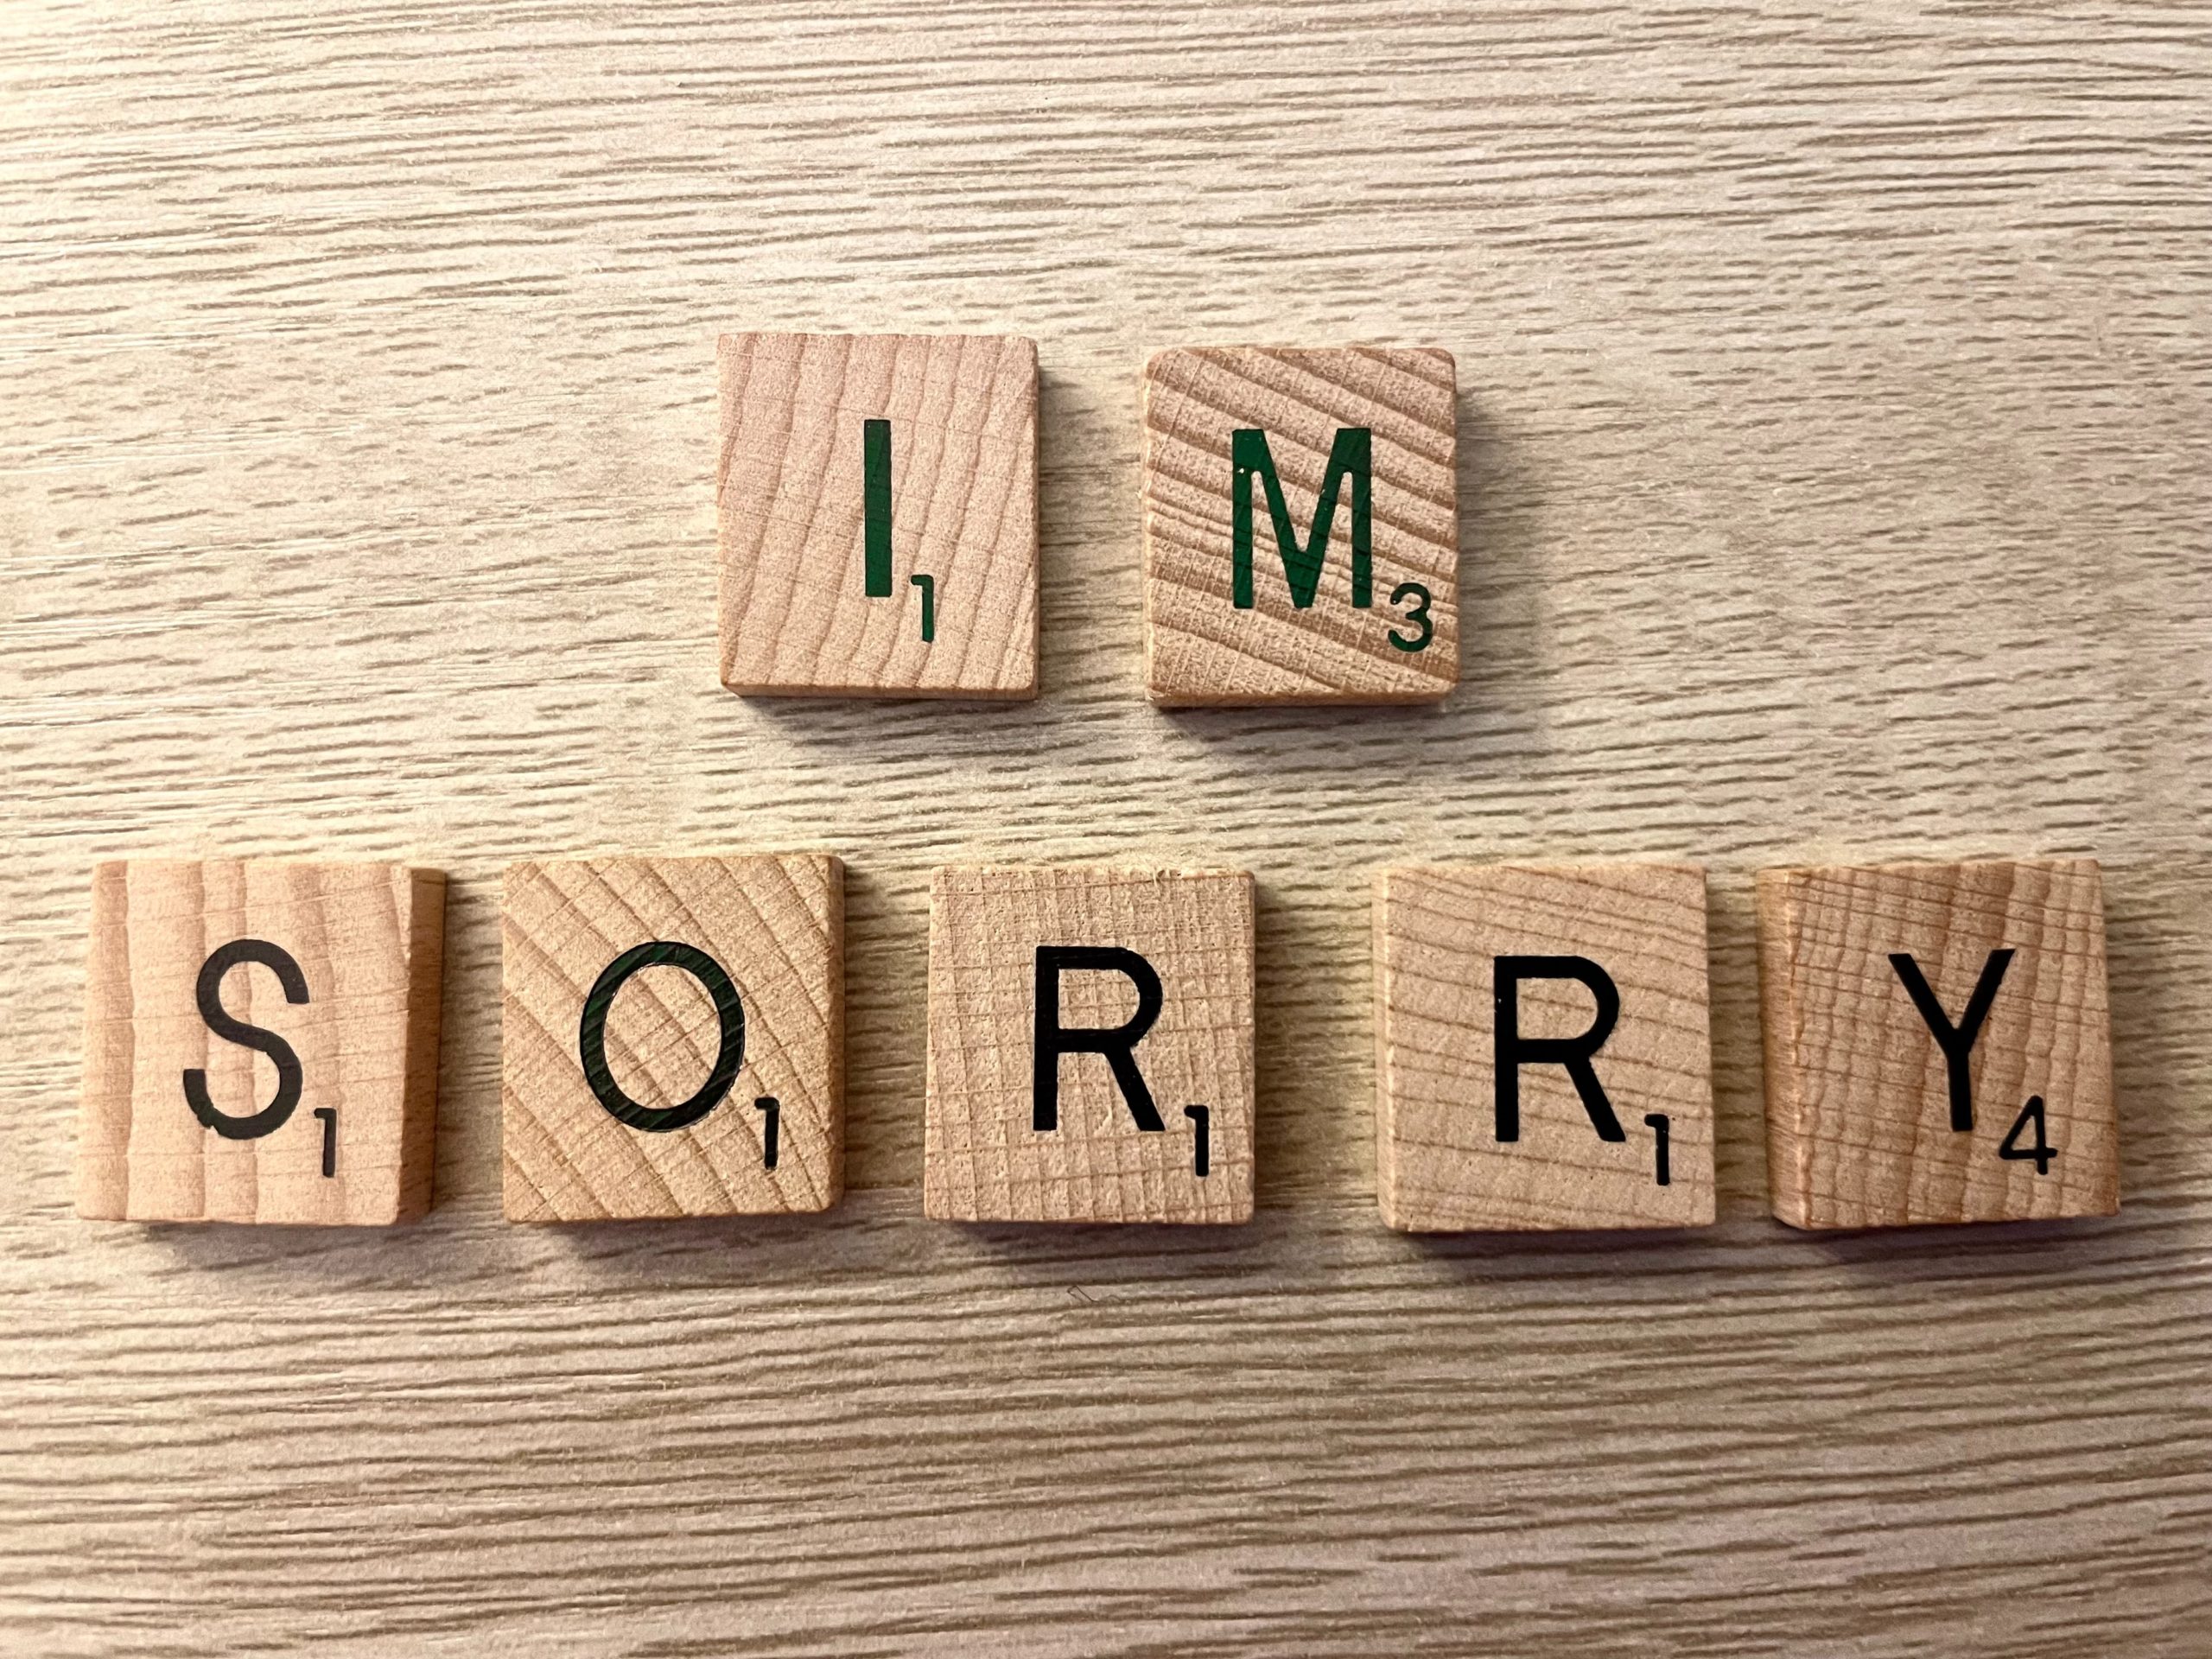 'I'm Sorry' spelled out in scrabble tiles.